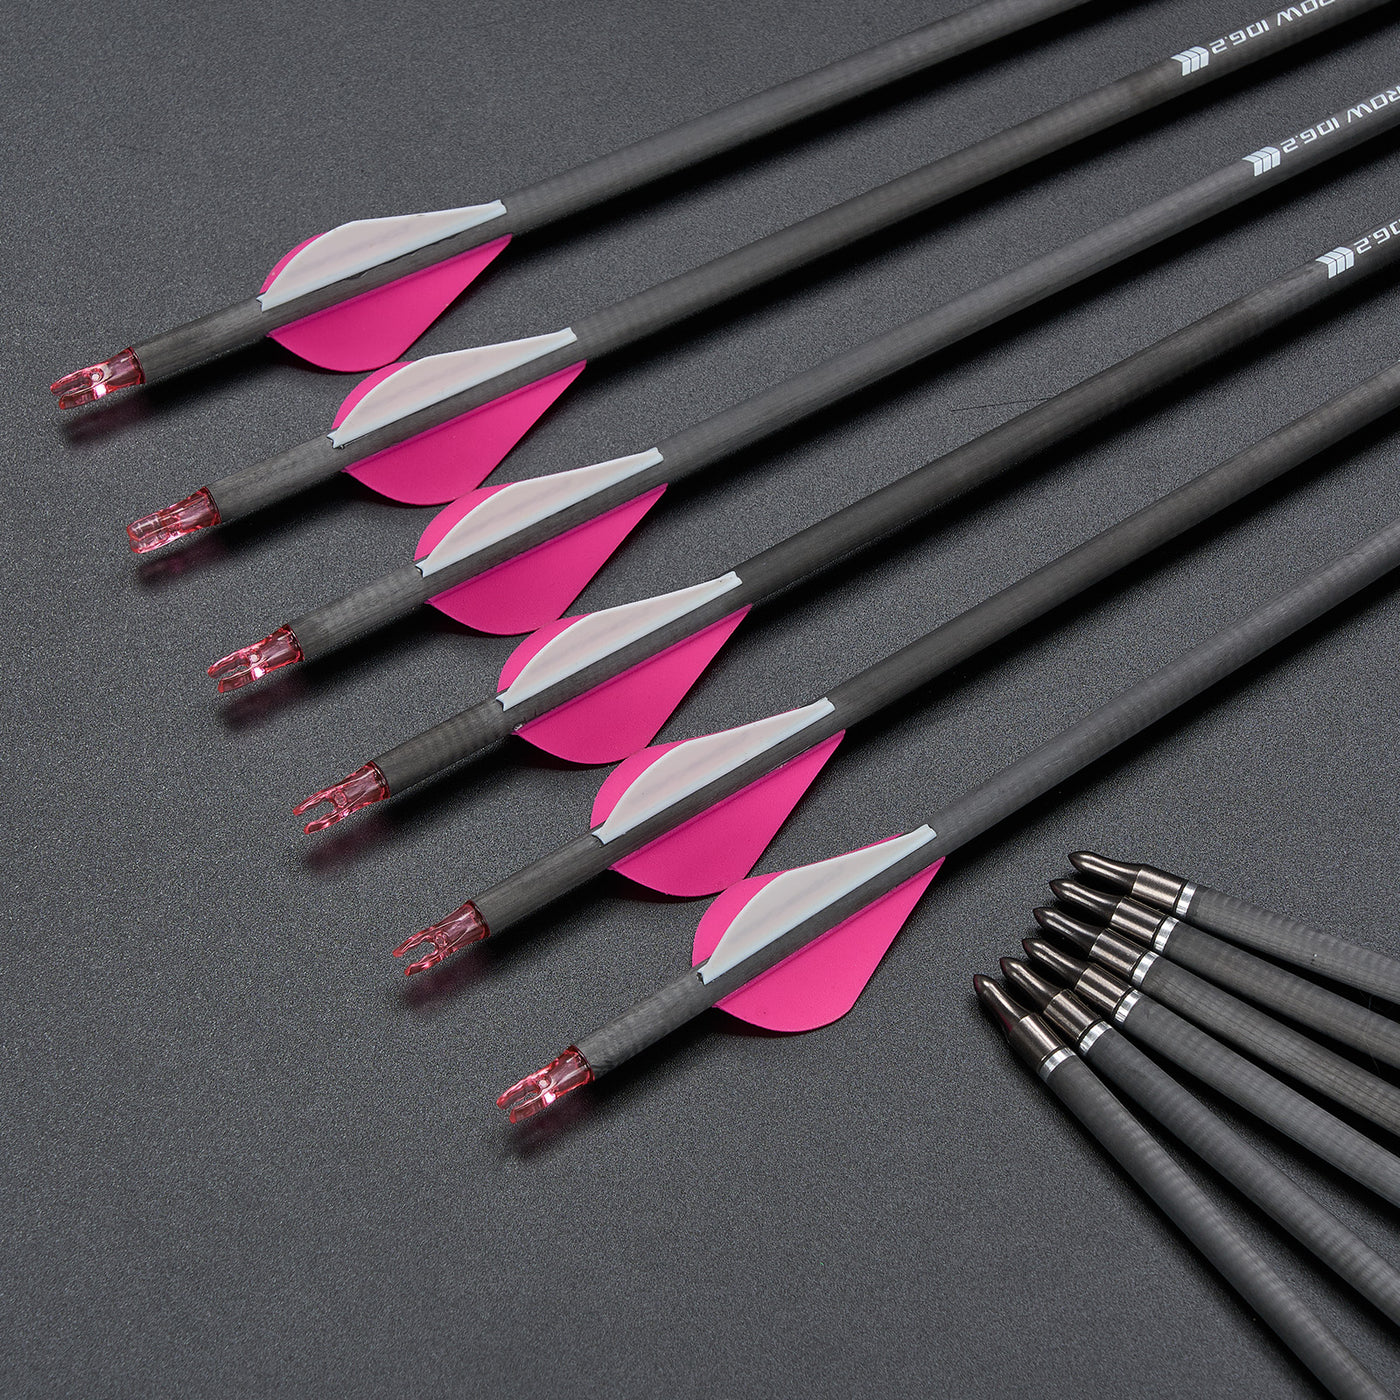 12x 31.5" ID 6.2mm Spine 300/350/400 Fletched Pure Carbon Archery Arrows